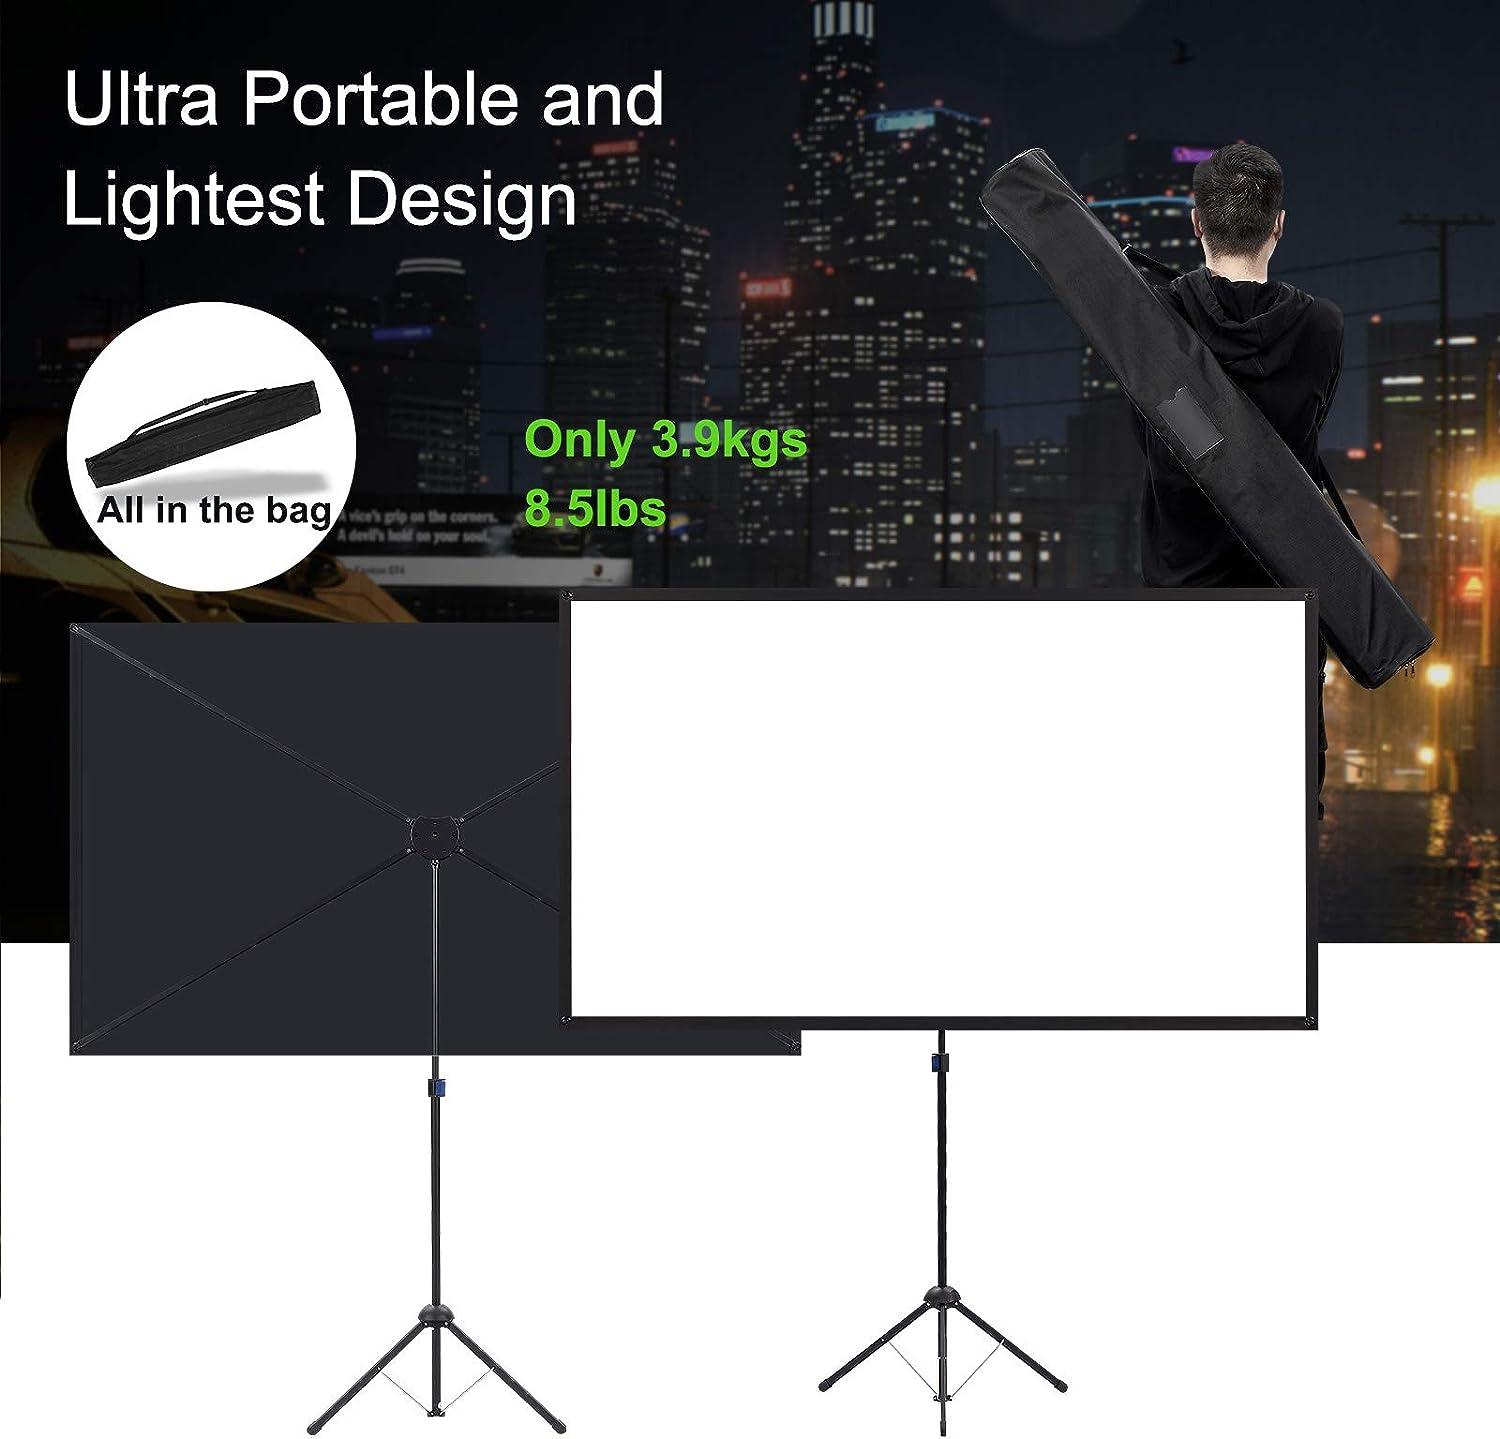 Projector Screen with Stand, 60 Inch Outdoor Projector Screen 16:9 - Massive Discounts